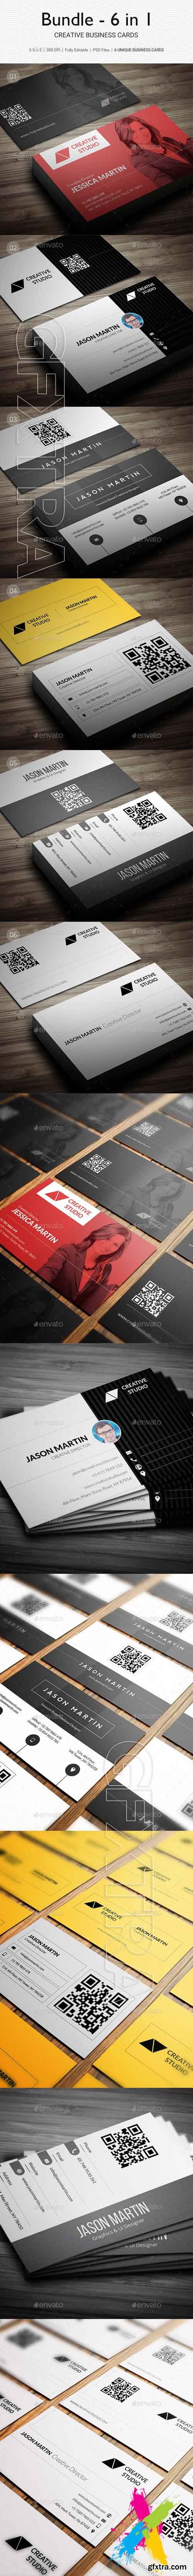 GraphicRiver - Bundle - 6 in 1 - Creative Business Cards - B29 20465912